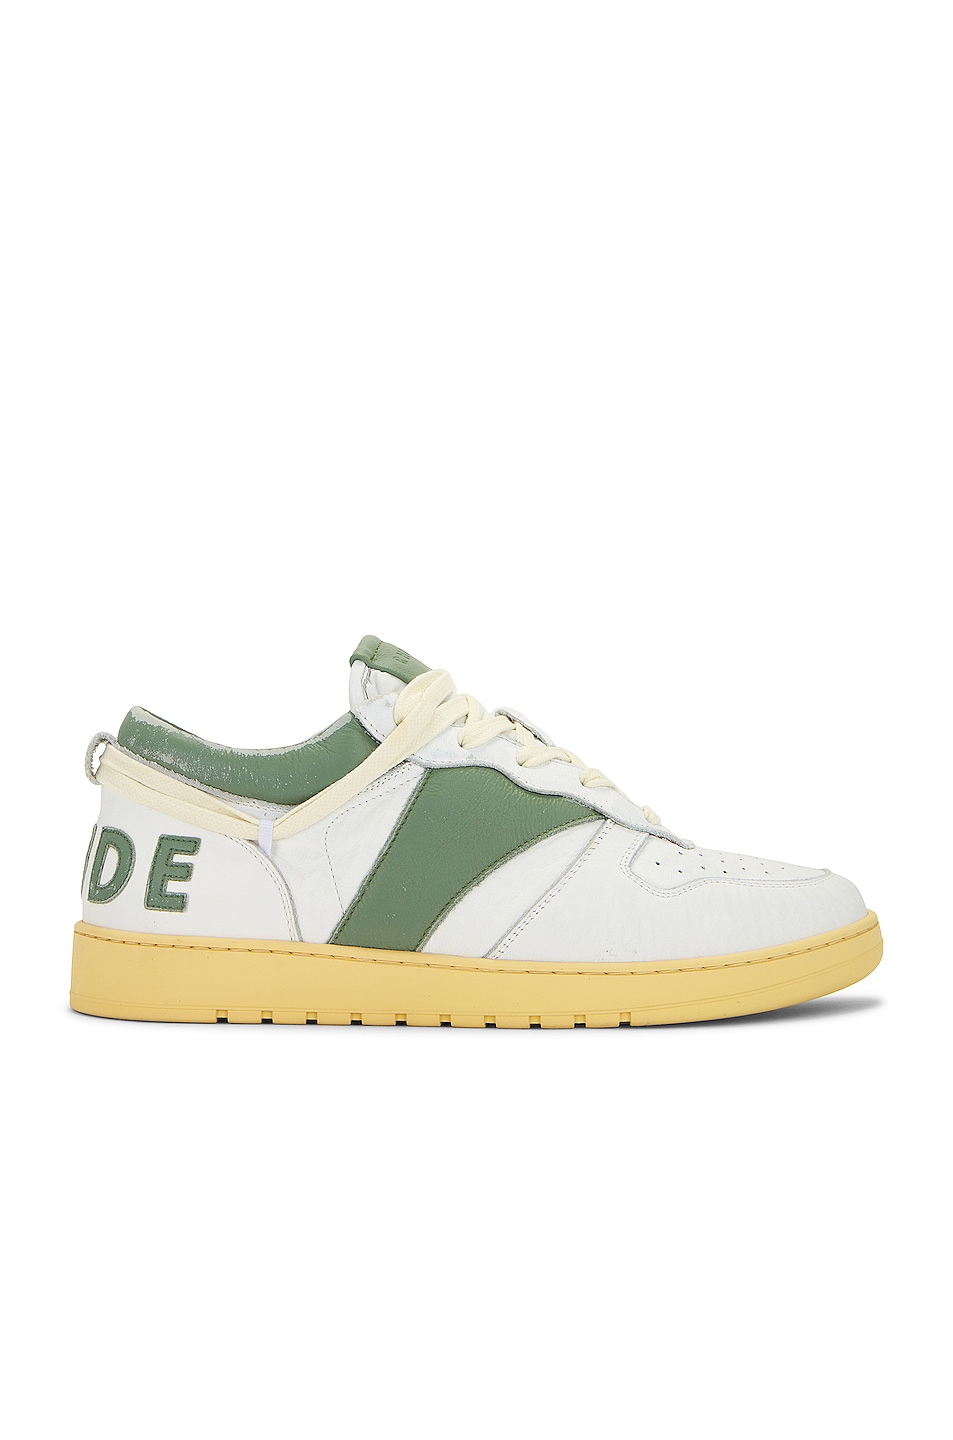 Image 1 of Rhude Rhecess Low Sneaker in White & Sage